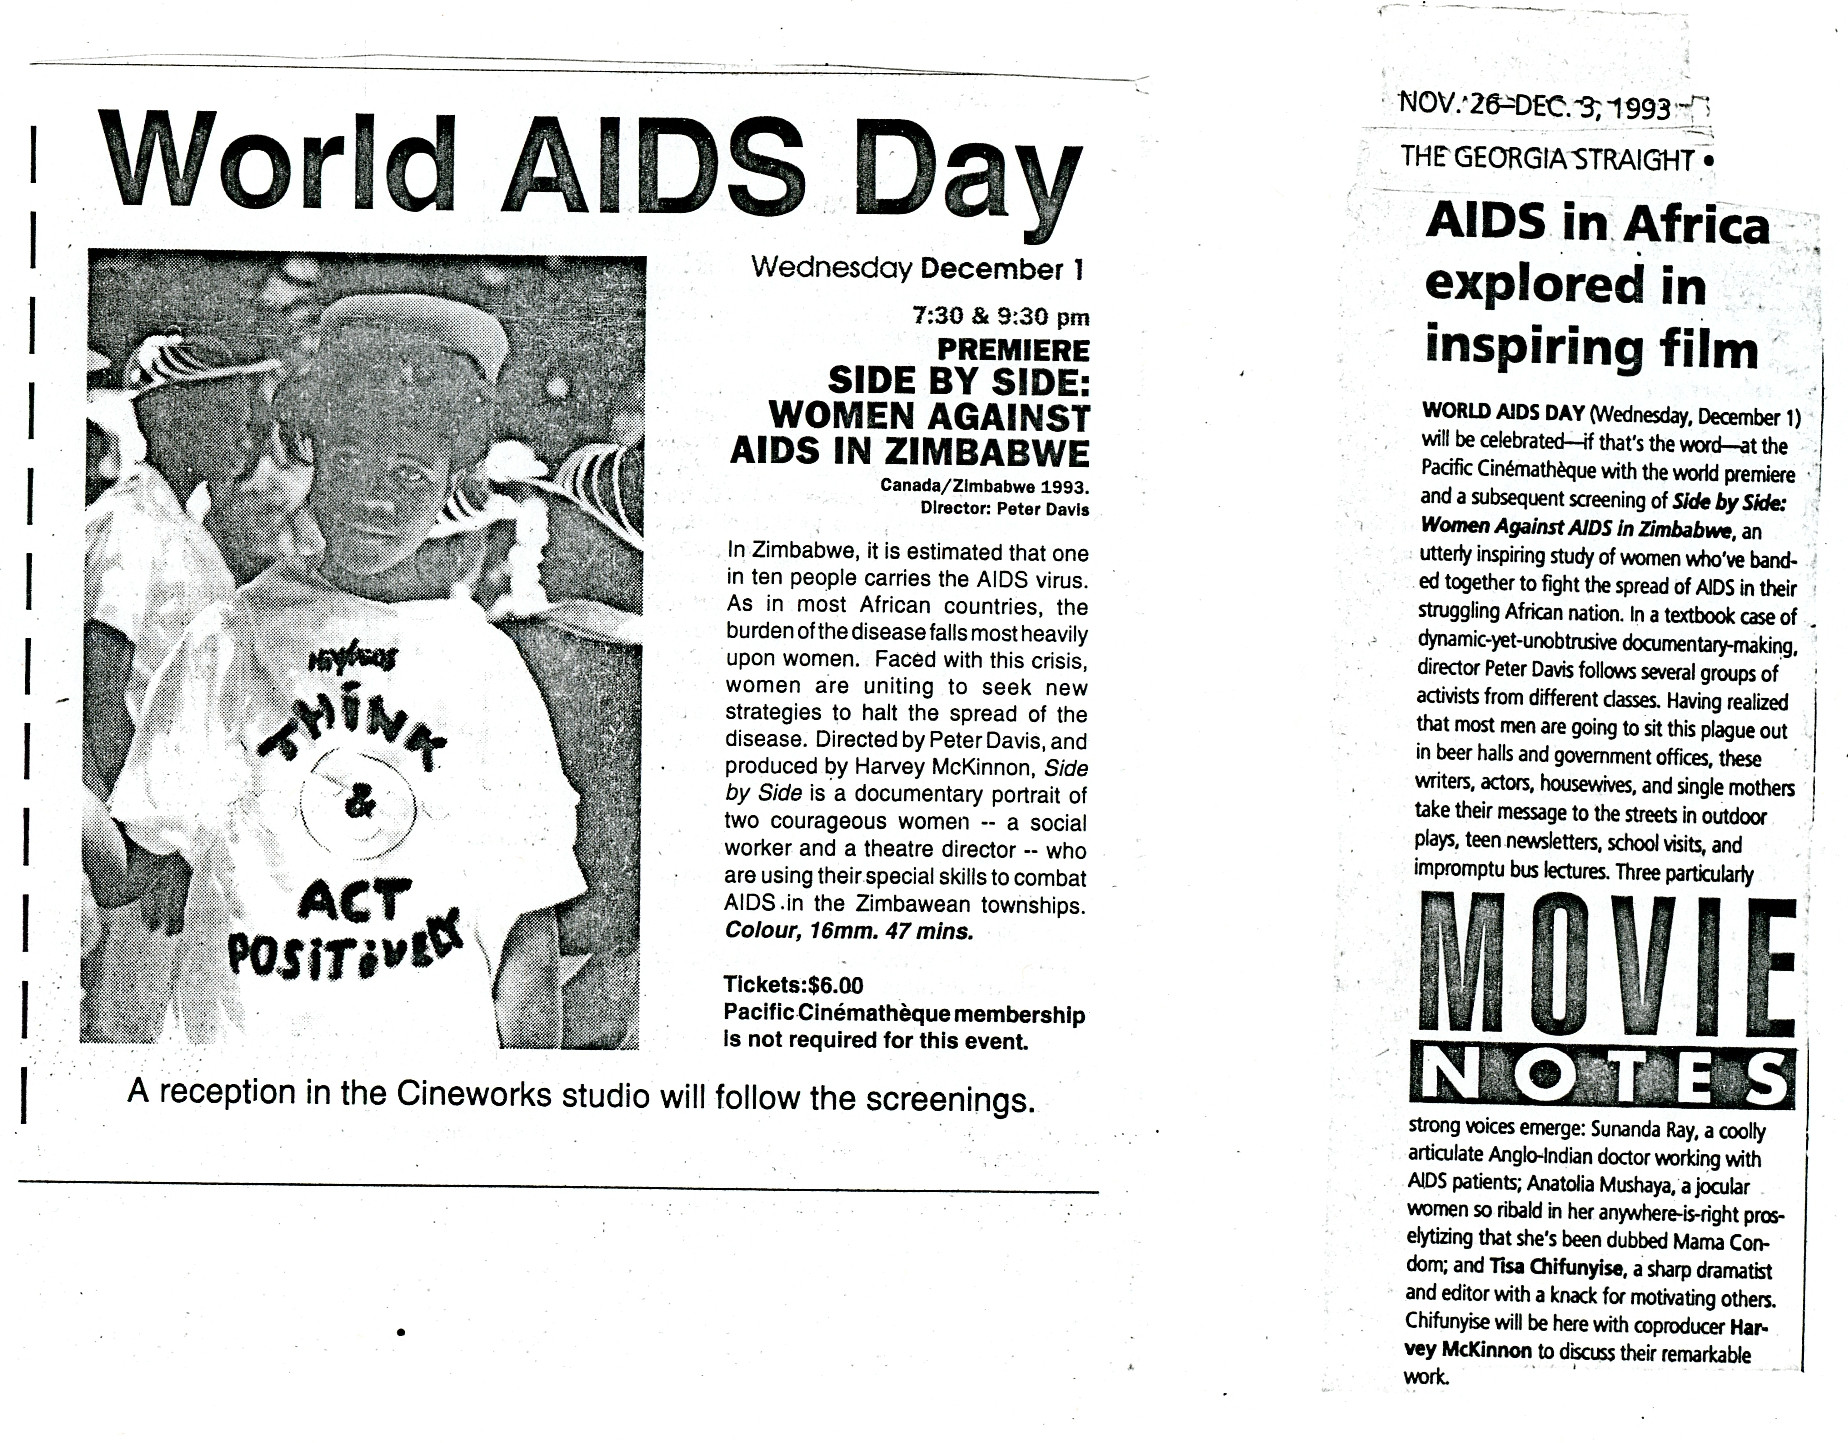 Side By Side: Women Against AIDS in Zimbabwe - News clippings.